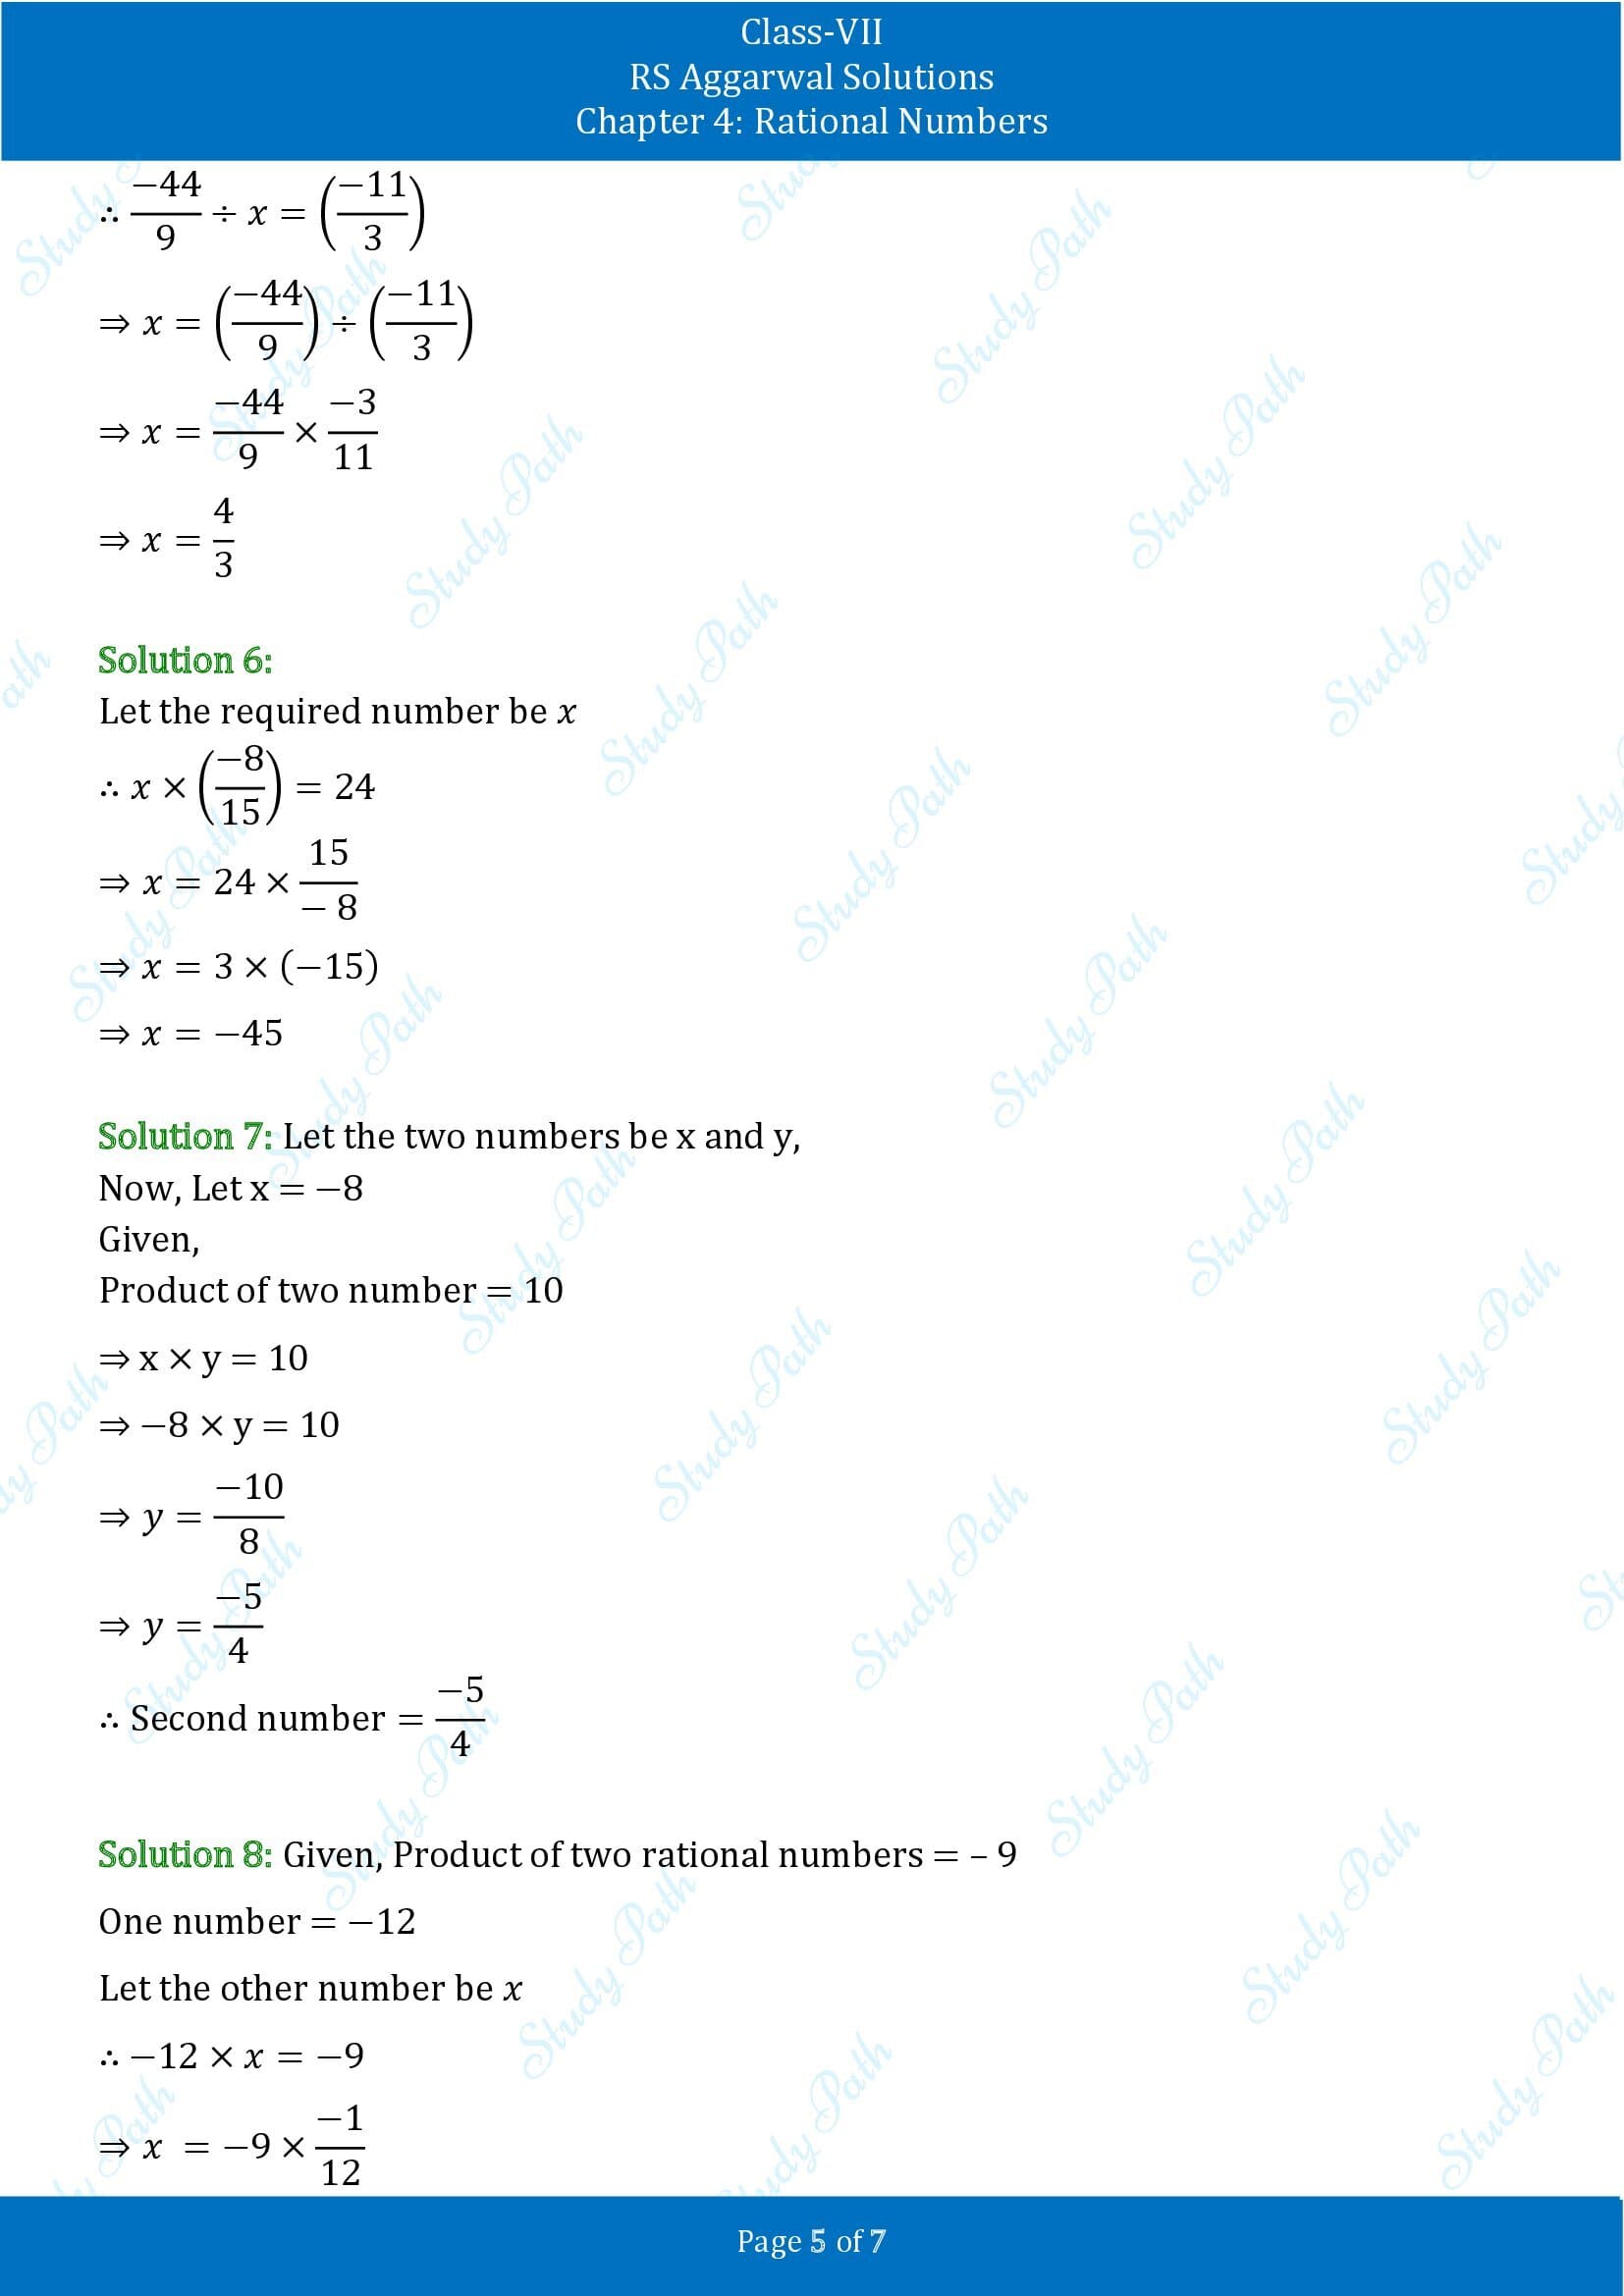 RS Aggarwal Solutions Class 7 Chapter 4 Rational Numbers Exercise 4F 00005